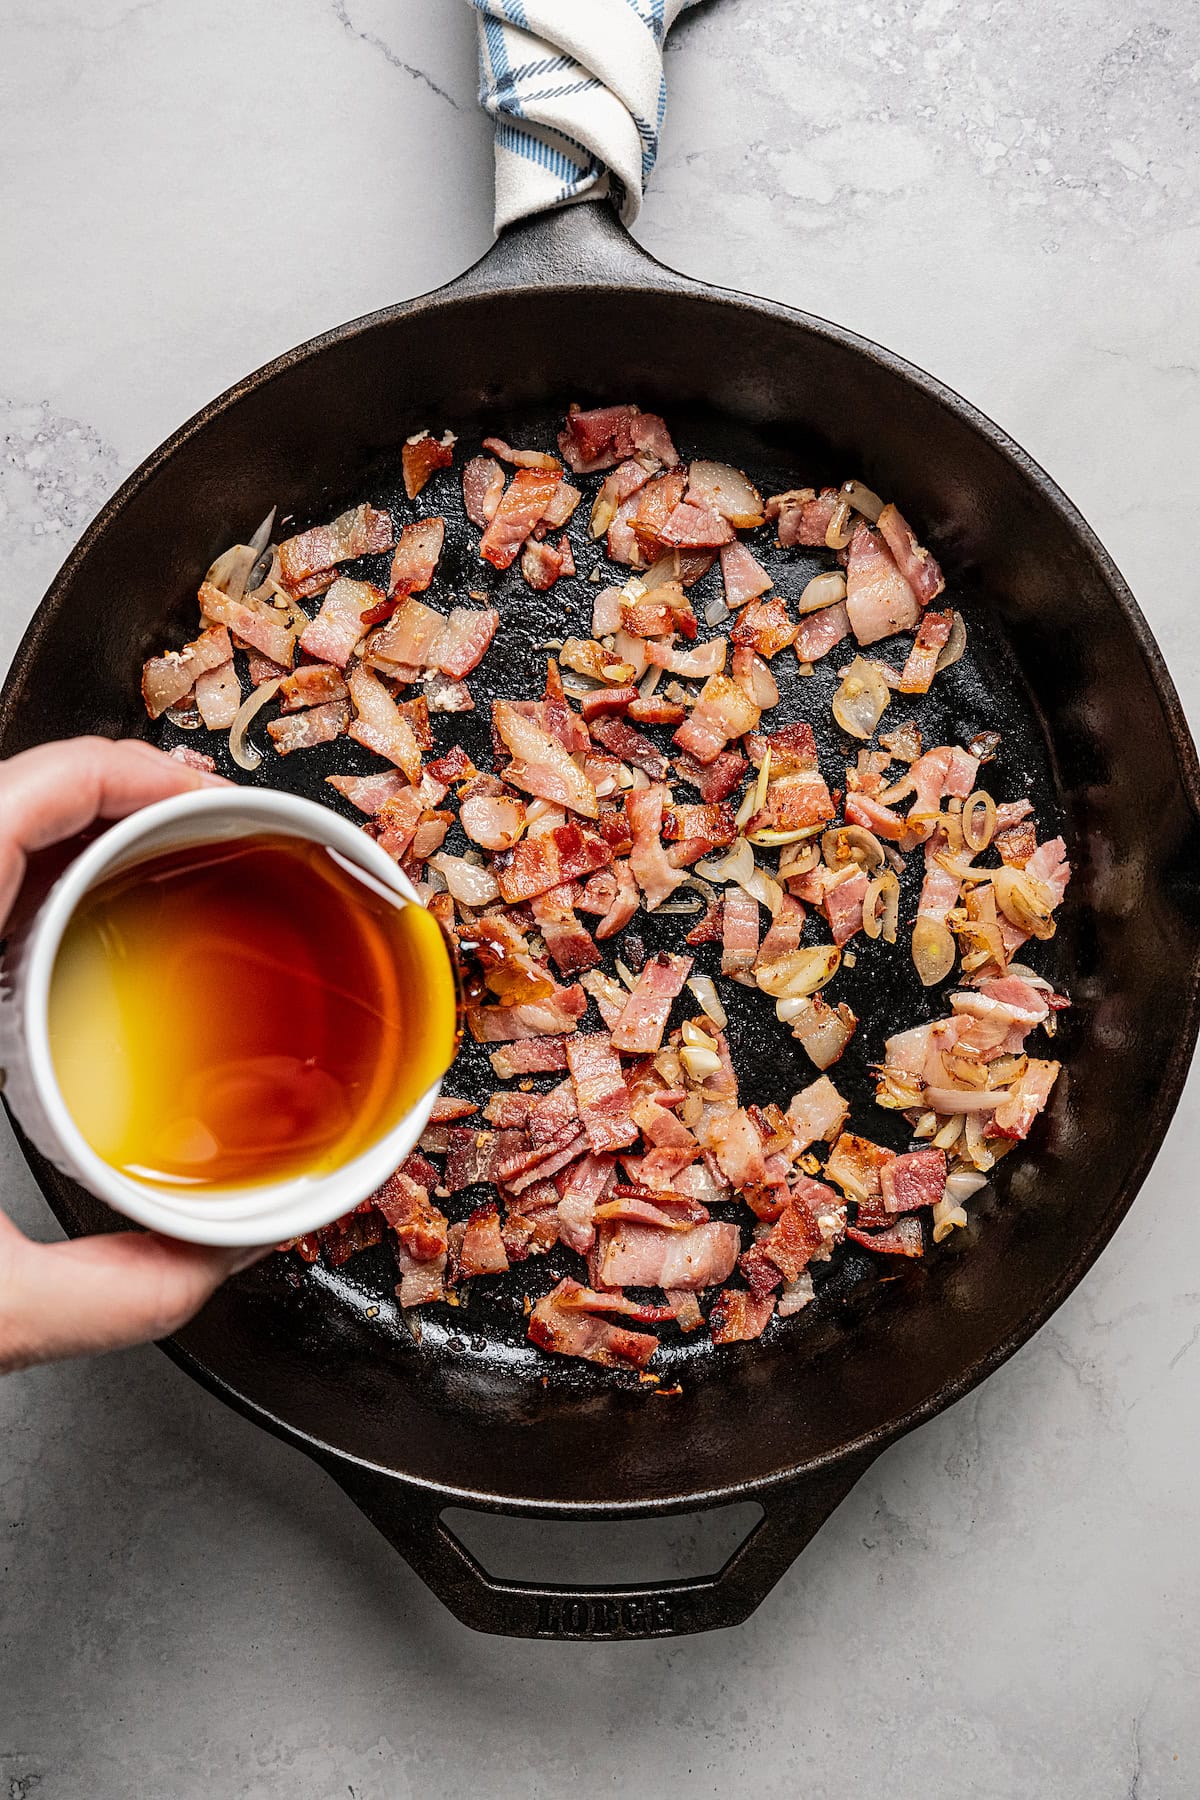 Maple syrup being poured from a white ramekin over diced bacon in a black skillet.